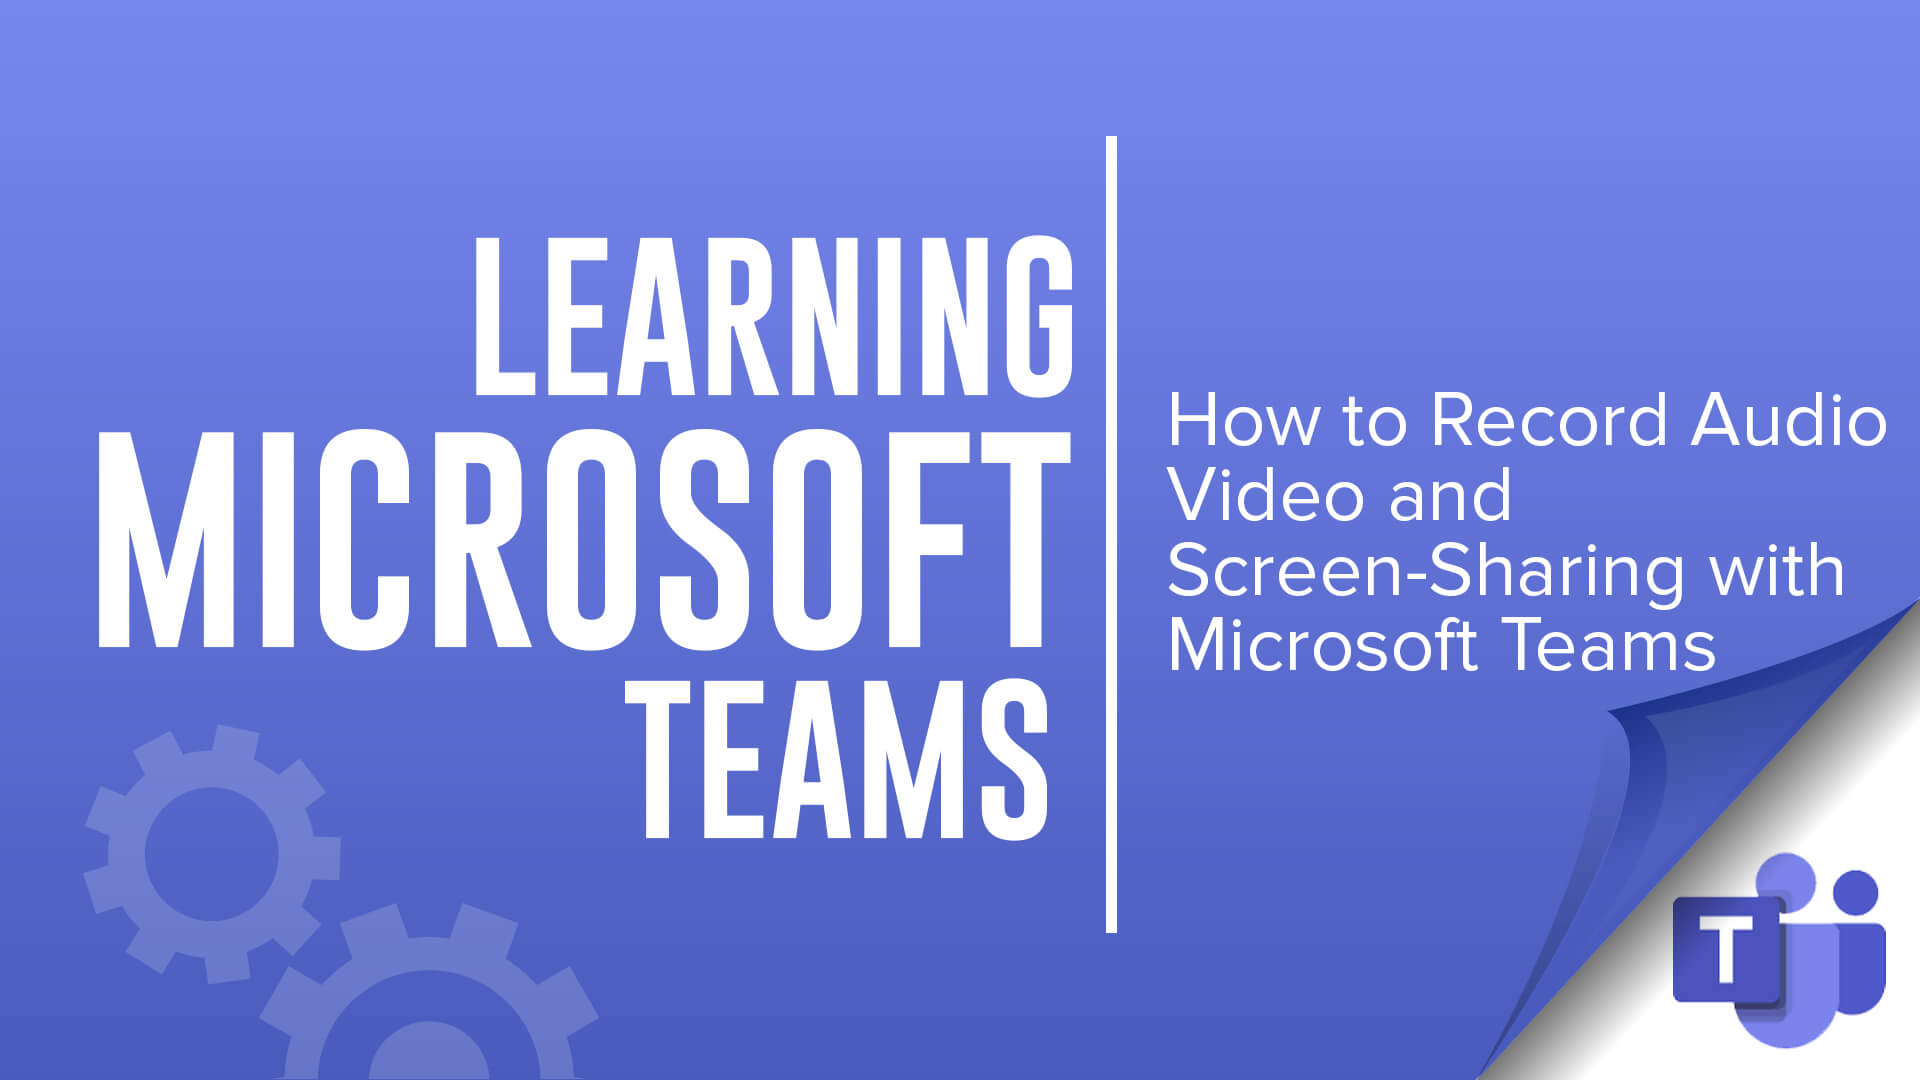 learning Microsoft Teams - How to Record Audio - Video and Screen-Sharing with Microsoft Teams